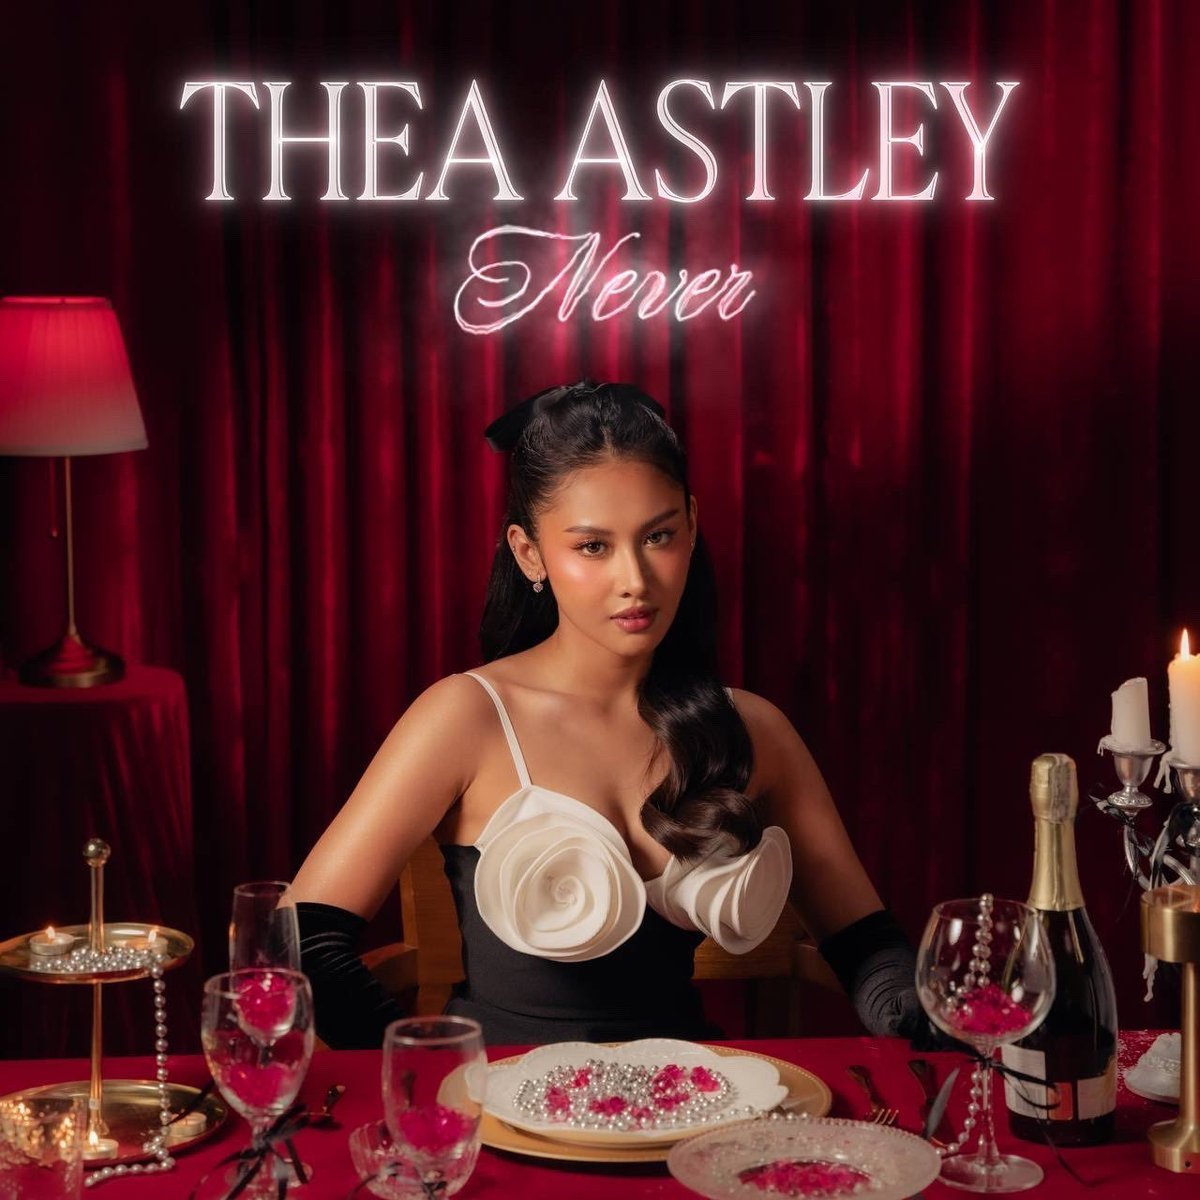 Thea Astley just dropped her debut single, 'Never', and we're loving every bit of it ✨ POWER STREAM!!! ❤️‍🔥 Spotify: open.spotify.com/track/0hx5OI7A… YouTube Music: music.youtube.com/watch?v=WrdRe7… Apple Music: music.apple.com/ph/album/never… NEVER BY THEA ASTLEY #TheaAstleySaysNEVER #TheaAstley |…